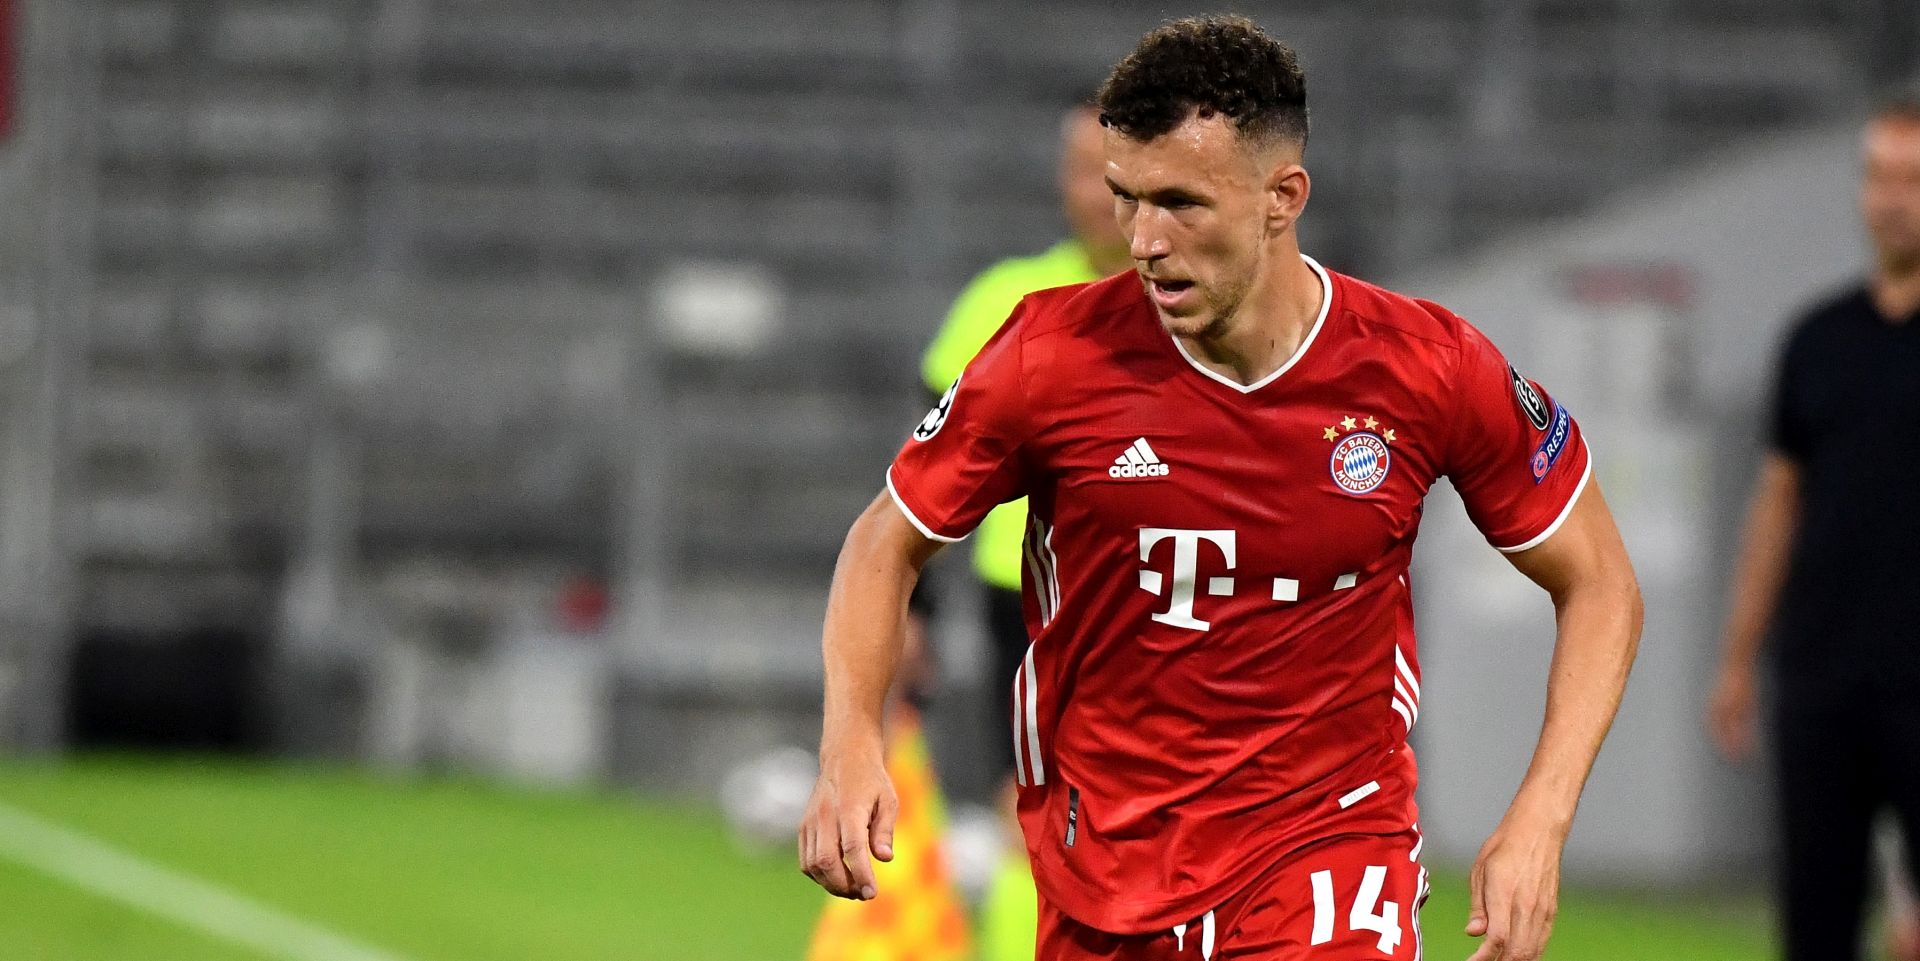 epa08592388 Bayern's Ivan Perisic in action during the UEFA Champions League Round of 16 second leg match between Bayern Munich and Chelsea FC in Munich, Germany, 08 August 2020.  EPA/PHILIPP GUELLAND